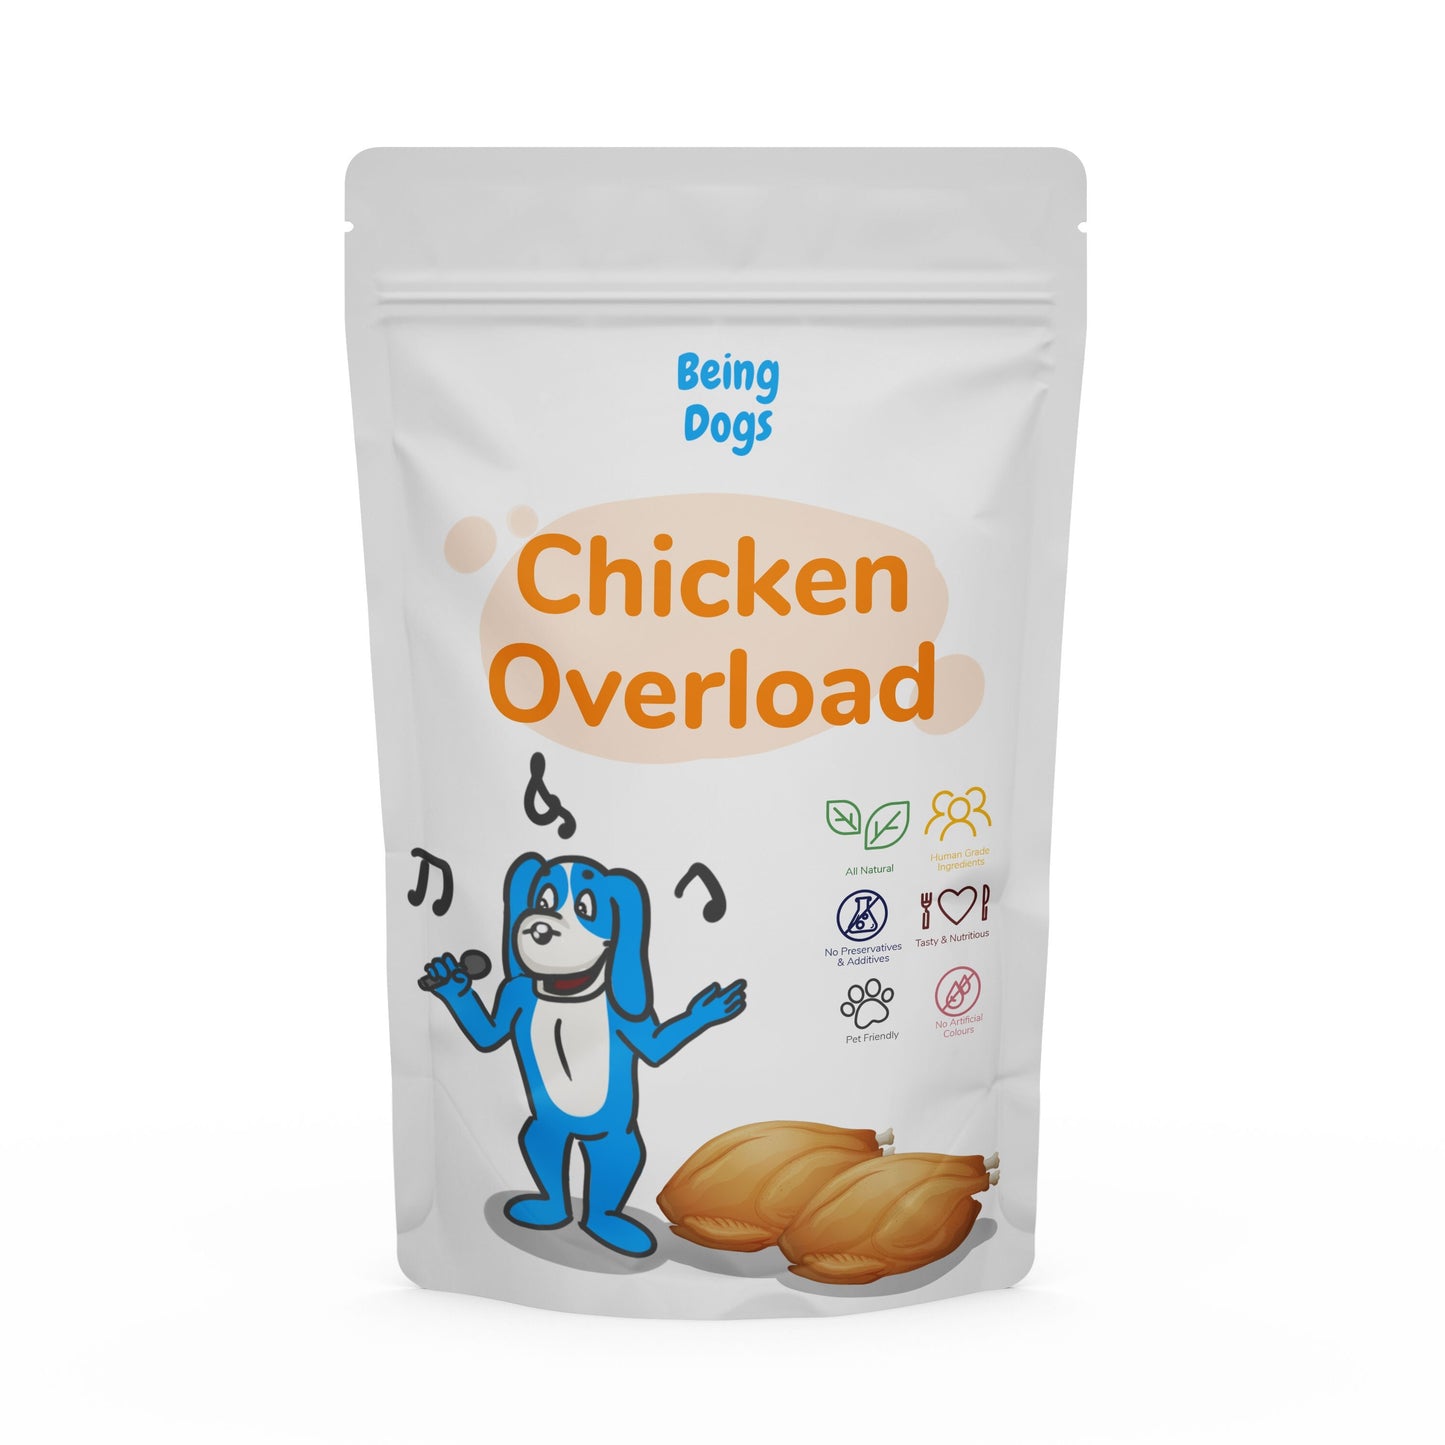 Chicken Overload Meal For Dogs (Single Packet), Customised, Made Fresh Daily, Zero Preservatives, High In Protein